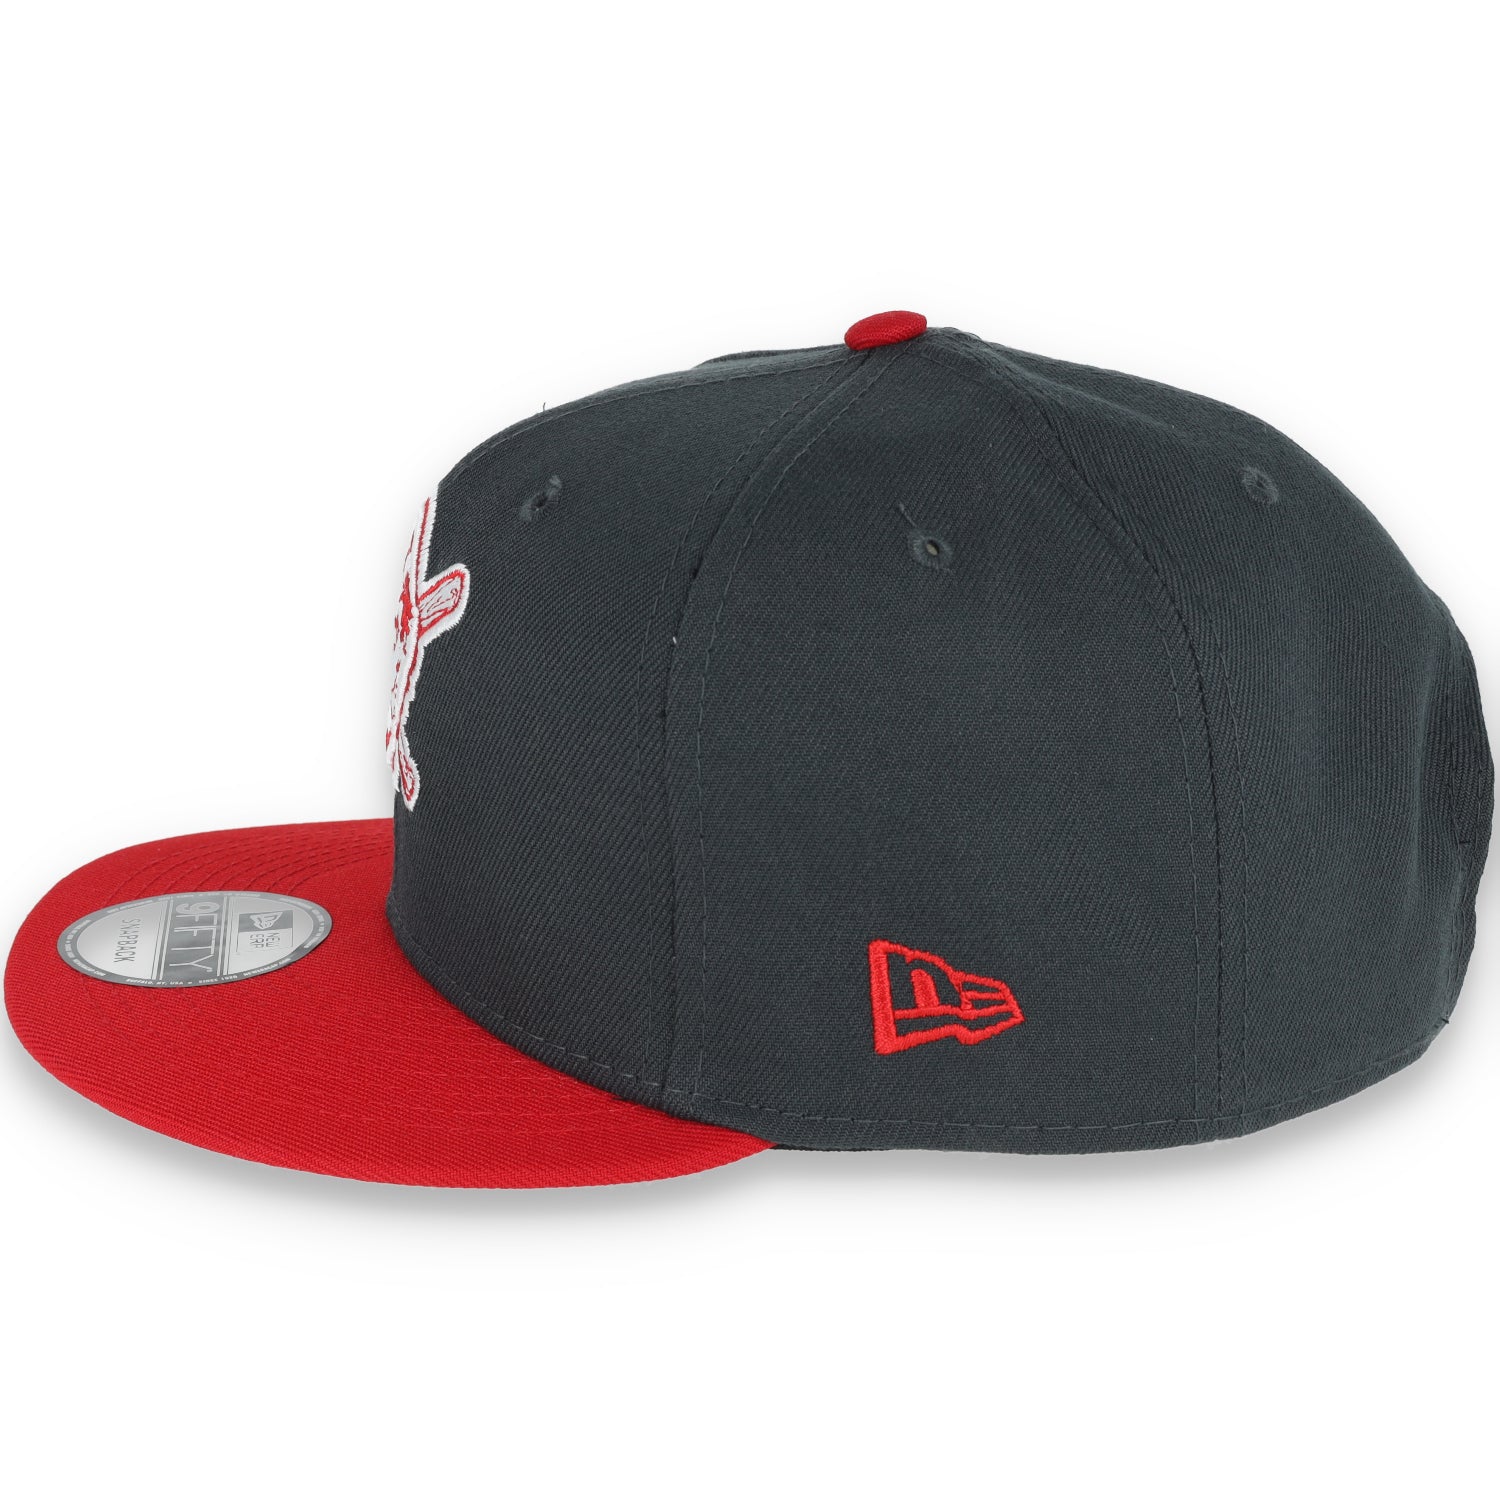 New Era Pittsburgh Pirates 2-Tone Color Pack 9FIFTY Snapback Hat - Grey/Scarlet